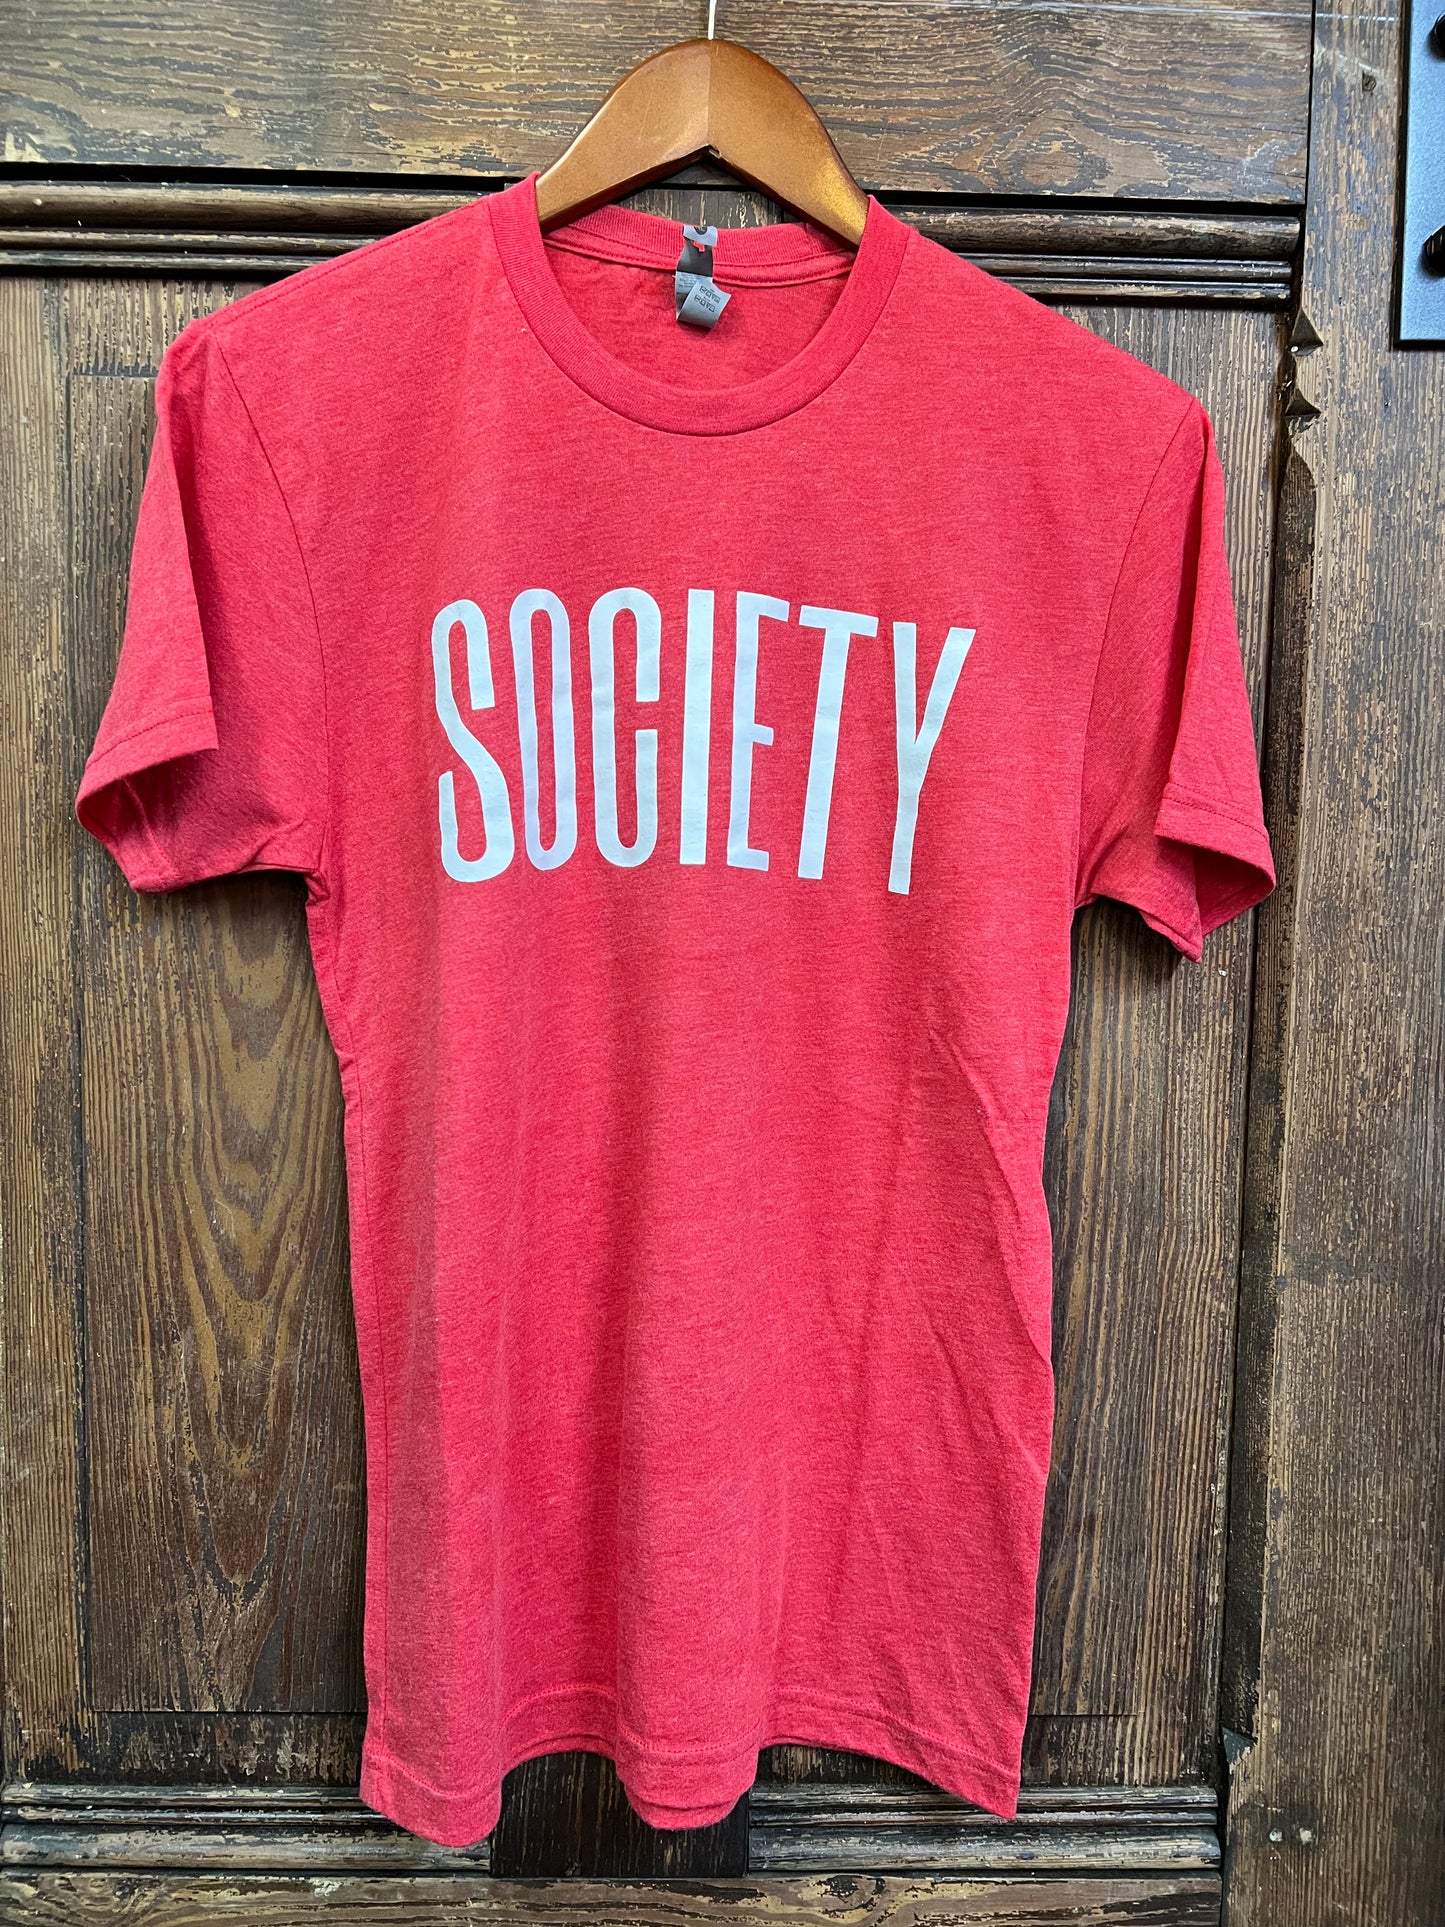 Society Graphic Tee - Red